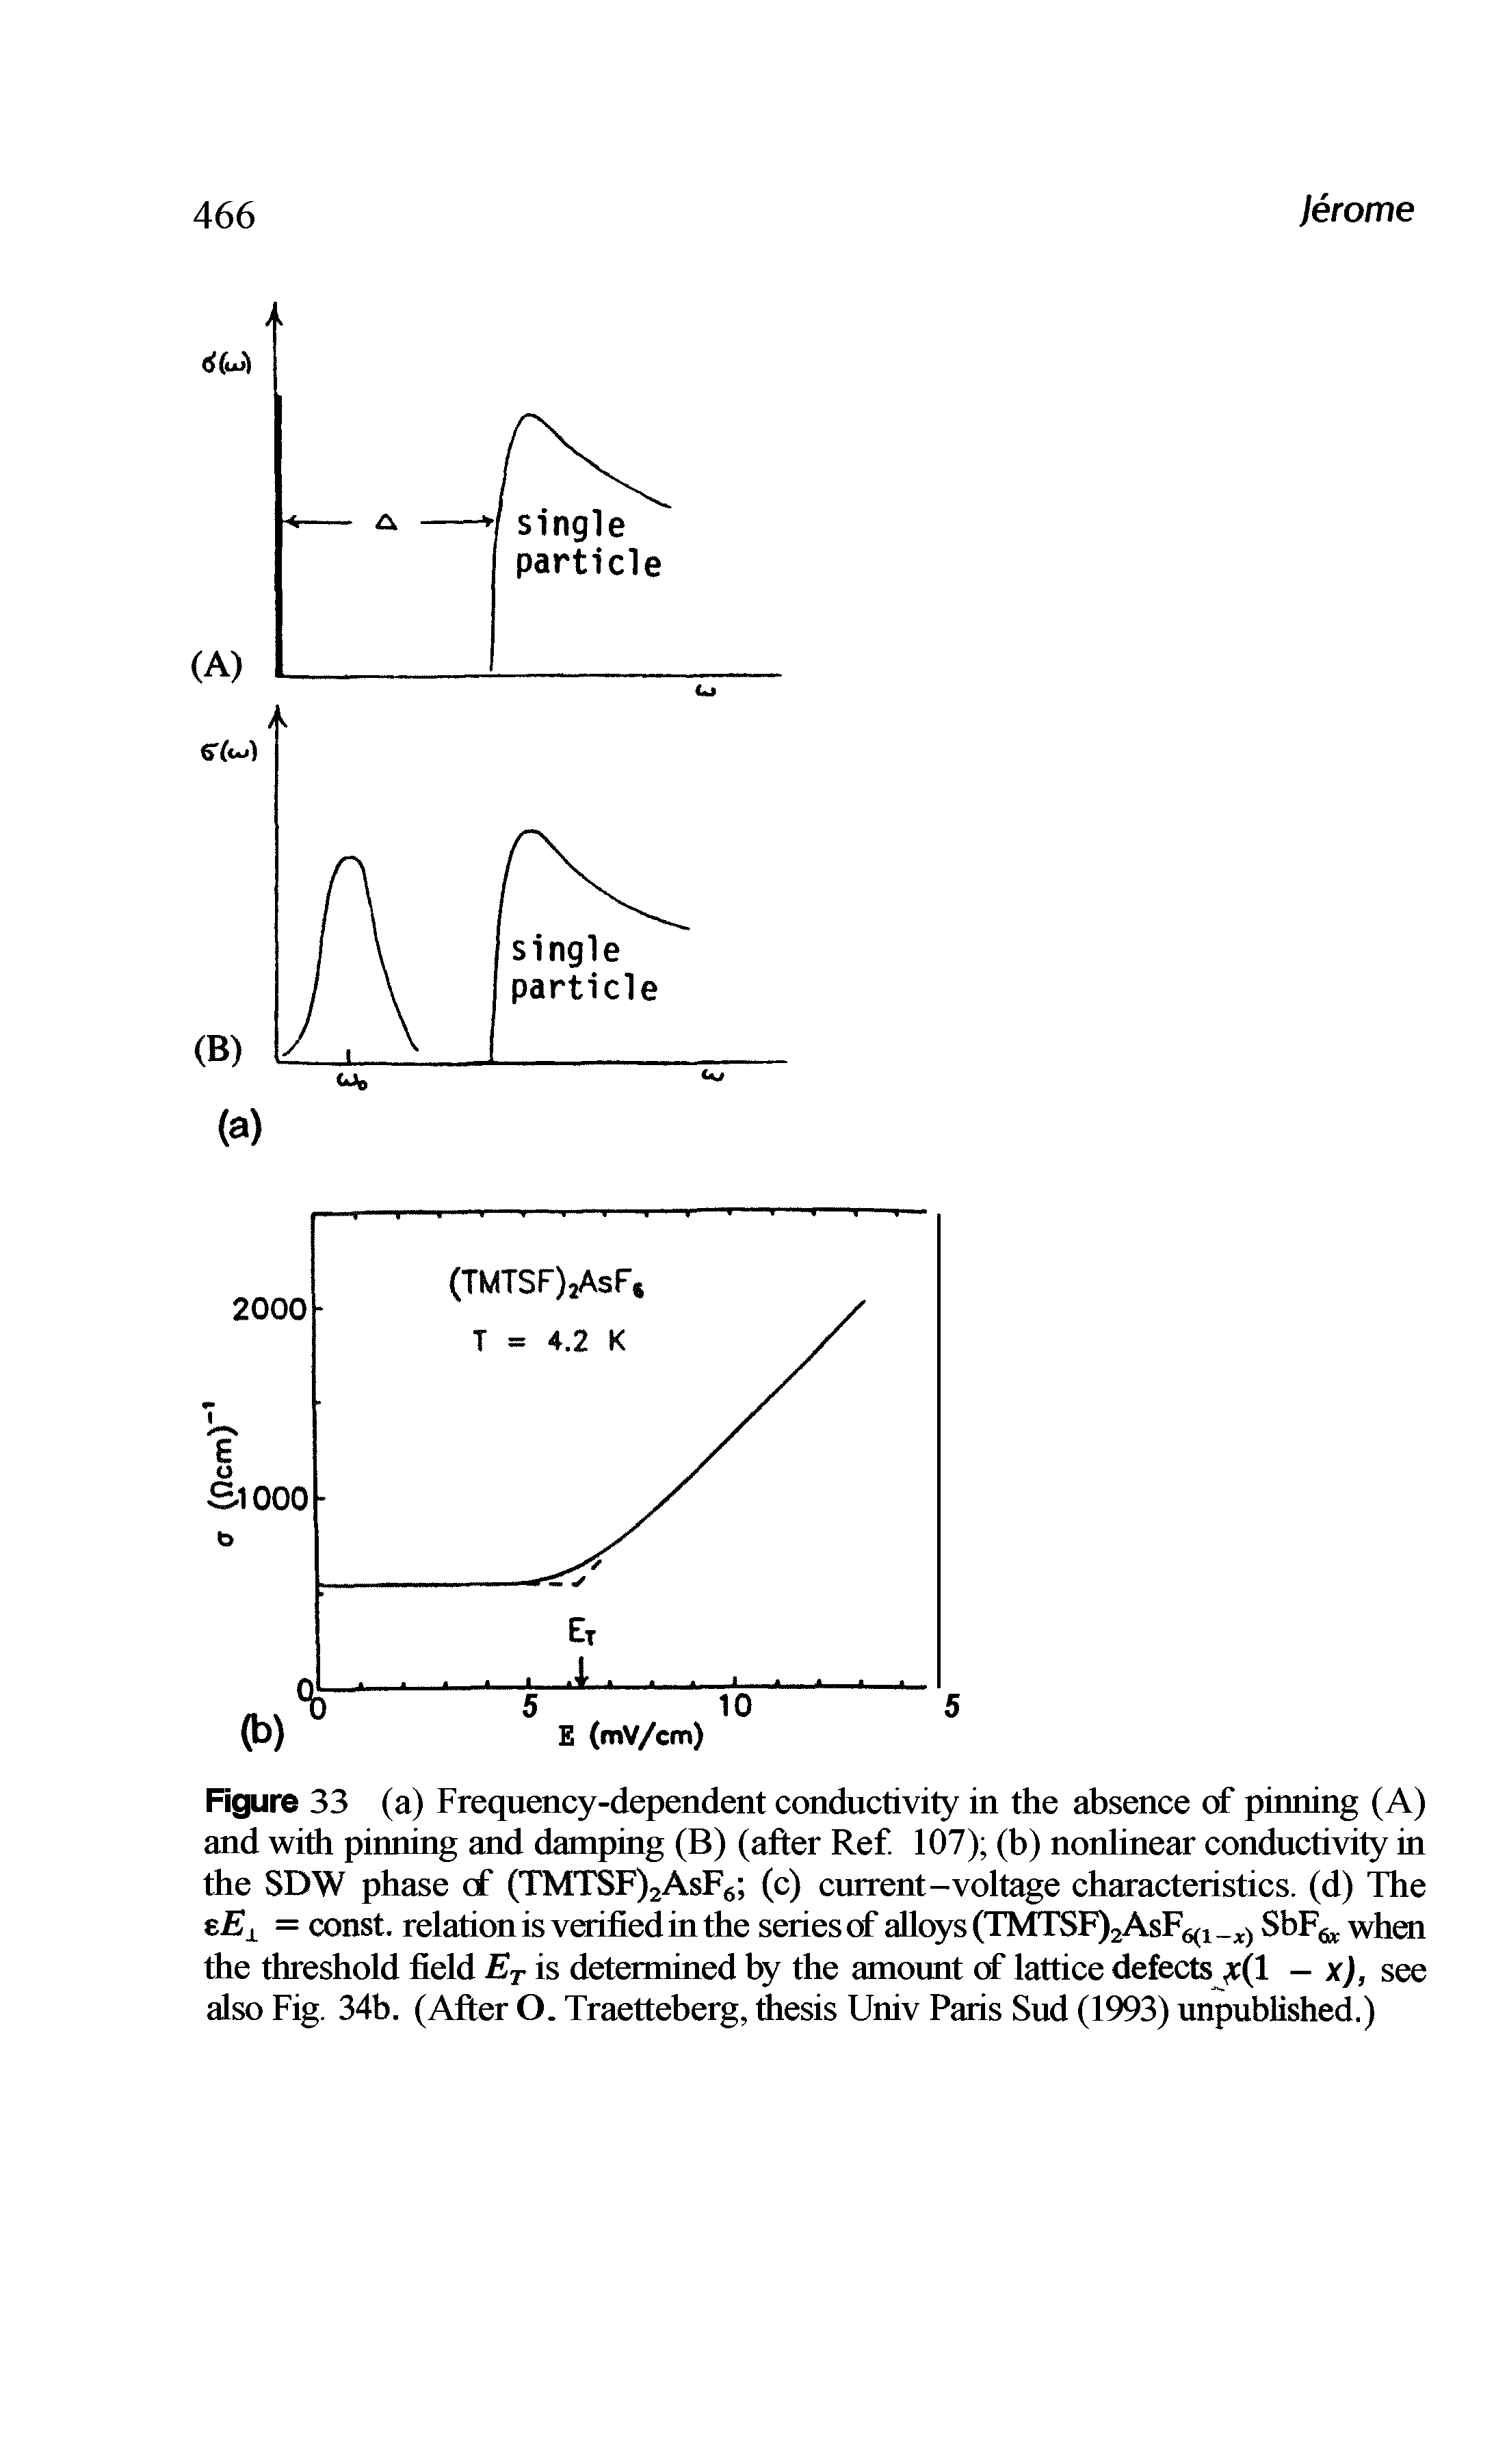 Figure 33 (a) Frequency-dependent conductivity in the absence of pinning (A) and with pinning and damping (B) (after Ref. 107) (b) nonlinear conductivity in the SDW phase cf (TMTSF)2AsF6 (c) current-voltage characteristics, (d) The zEx = const, relation is verified in the series of alloys (TMTSF)2AsF6(1 x) SbF when the threshold field ET is determined by the amount of lattice defects <r(l - x), see also Fig. 34b. (After O. Traetteberg, thesis Univ Paris Sud (1993) unpublished.)...